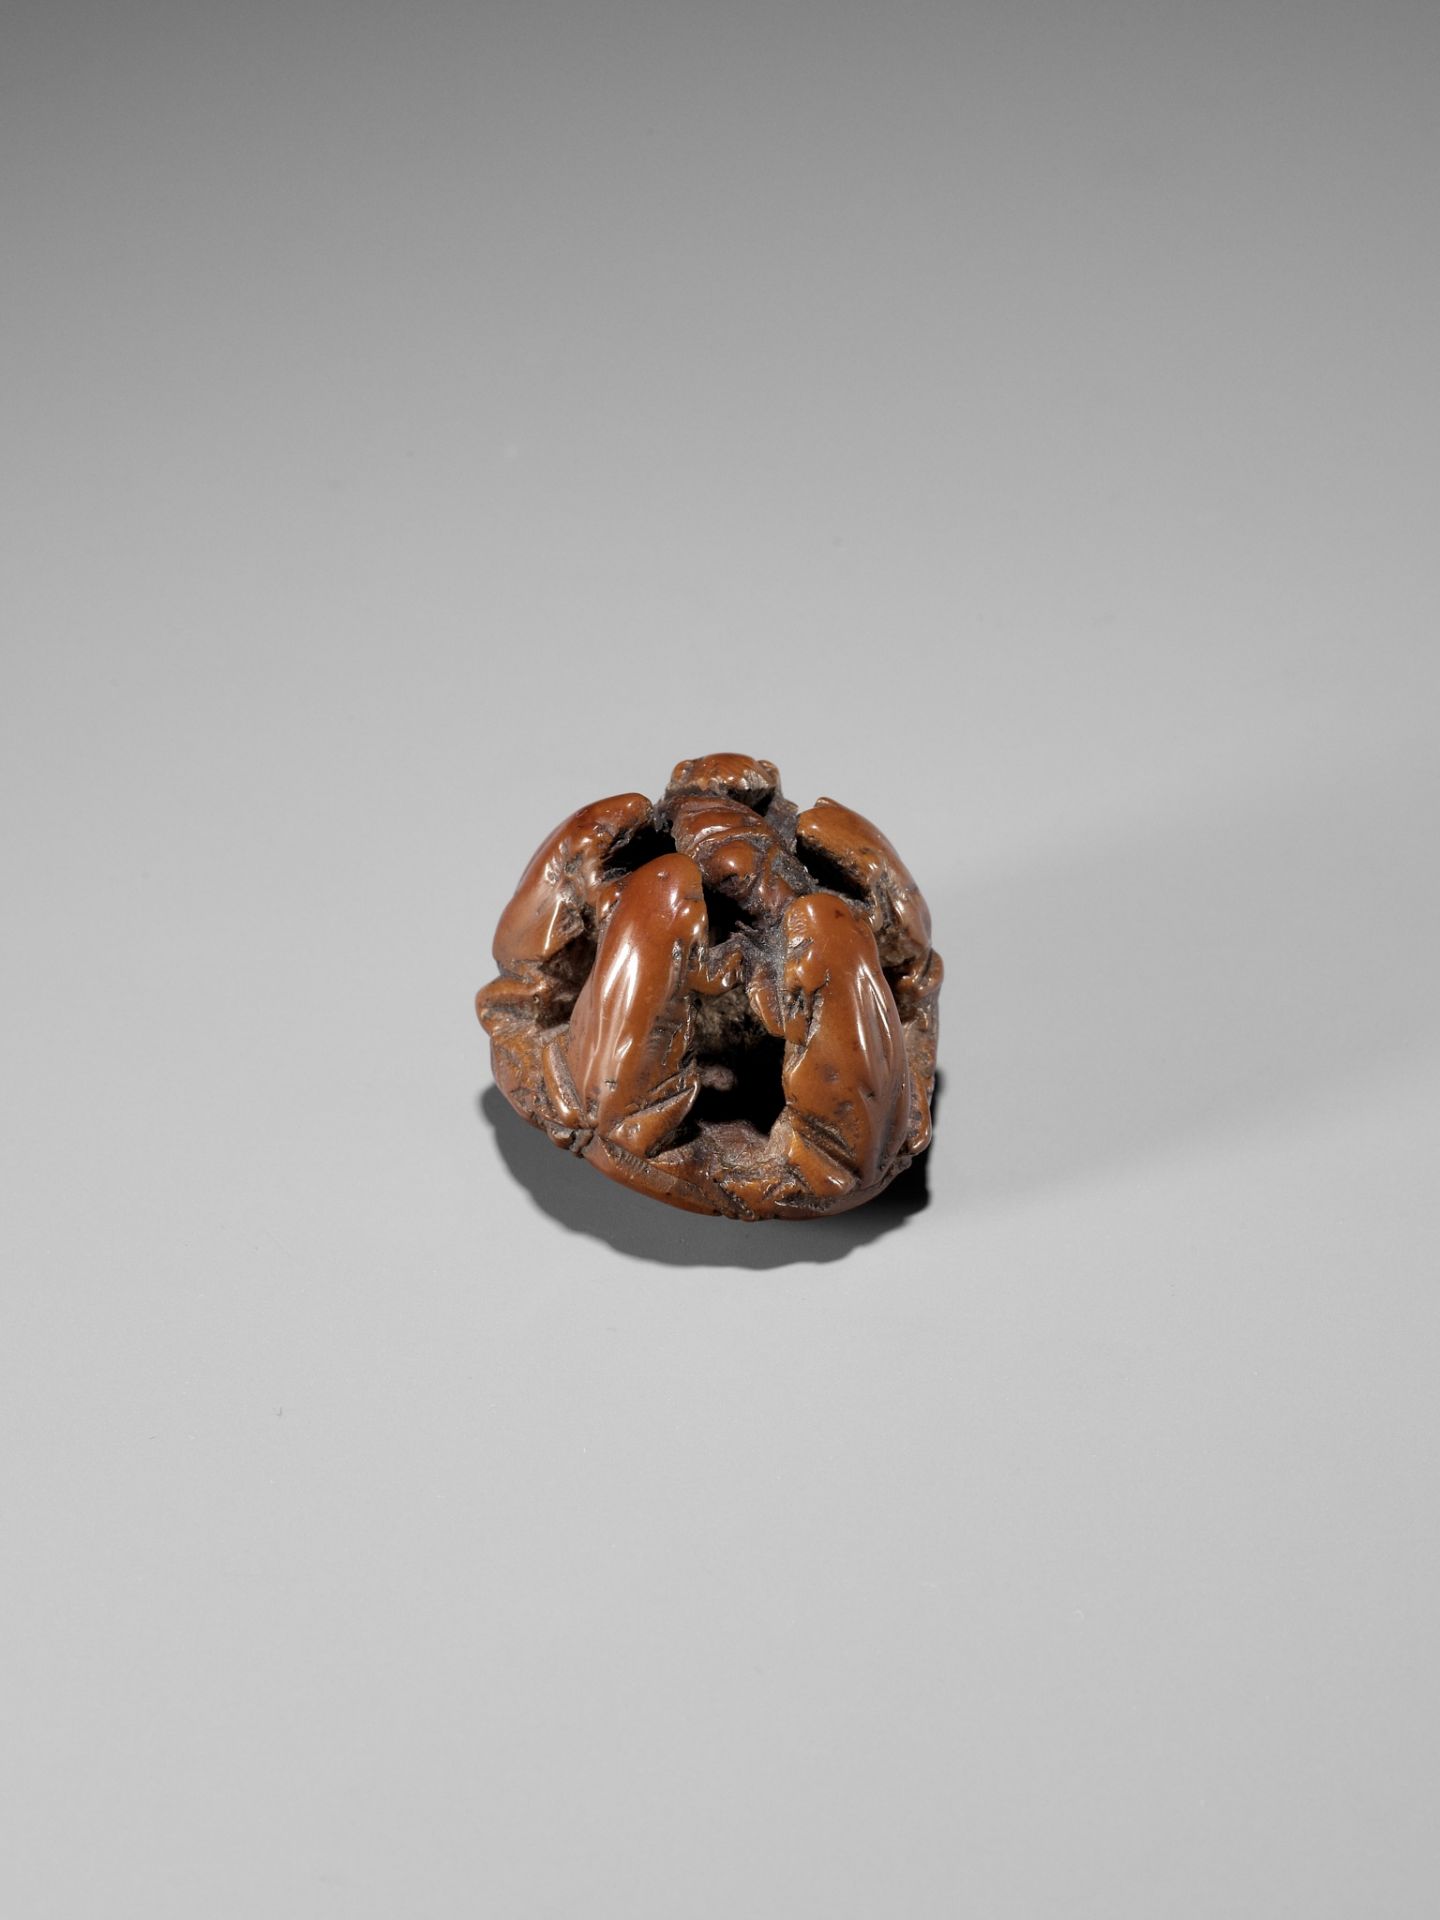 A RARE NUT NETSUKE OF FIVE FROGS ON A LOTUS LEAF, ATTRIBUTED TO SEIMIN - Image 7 of 9